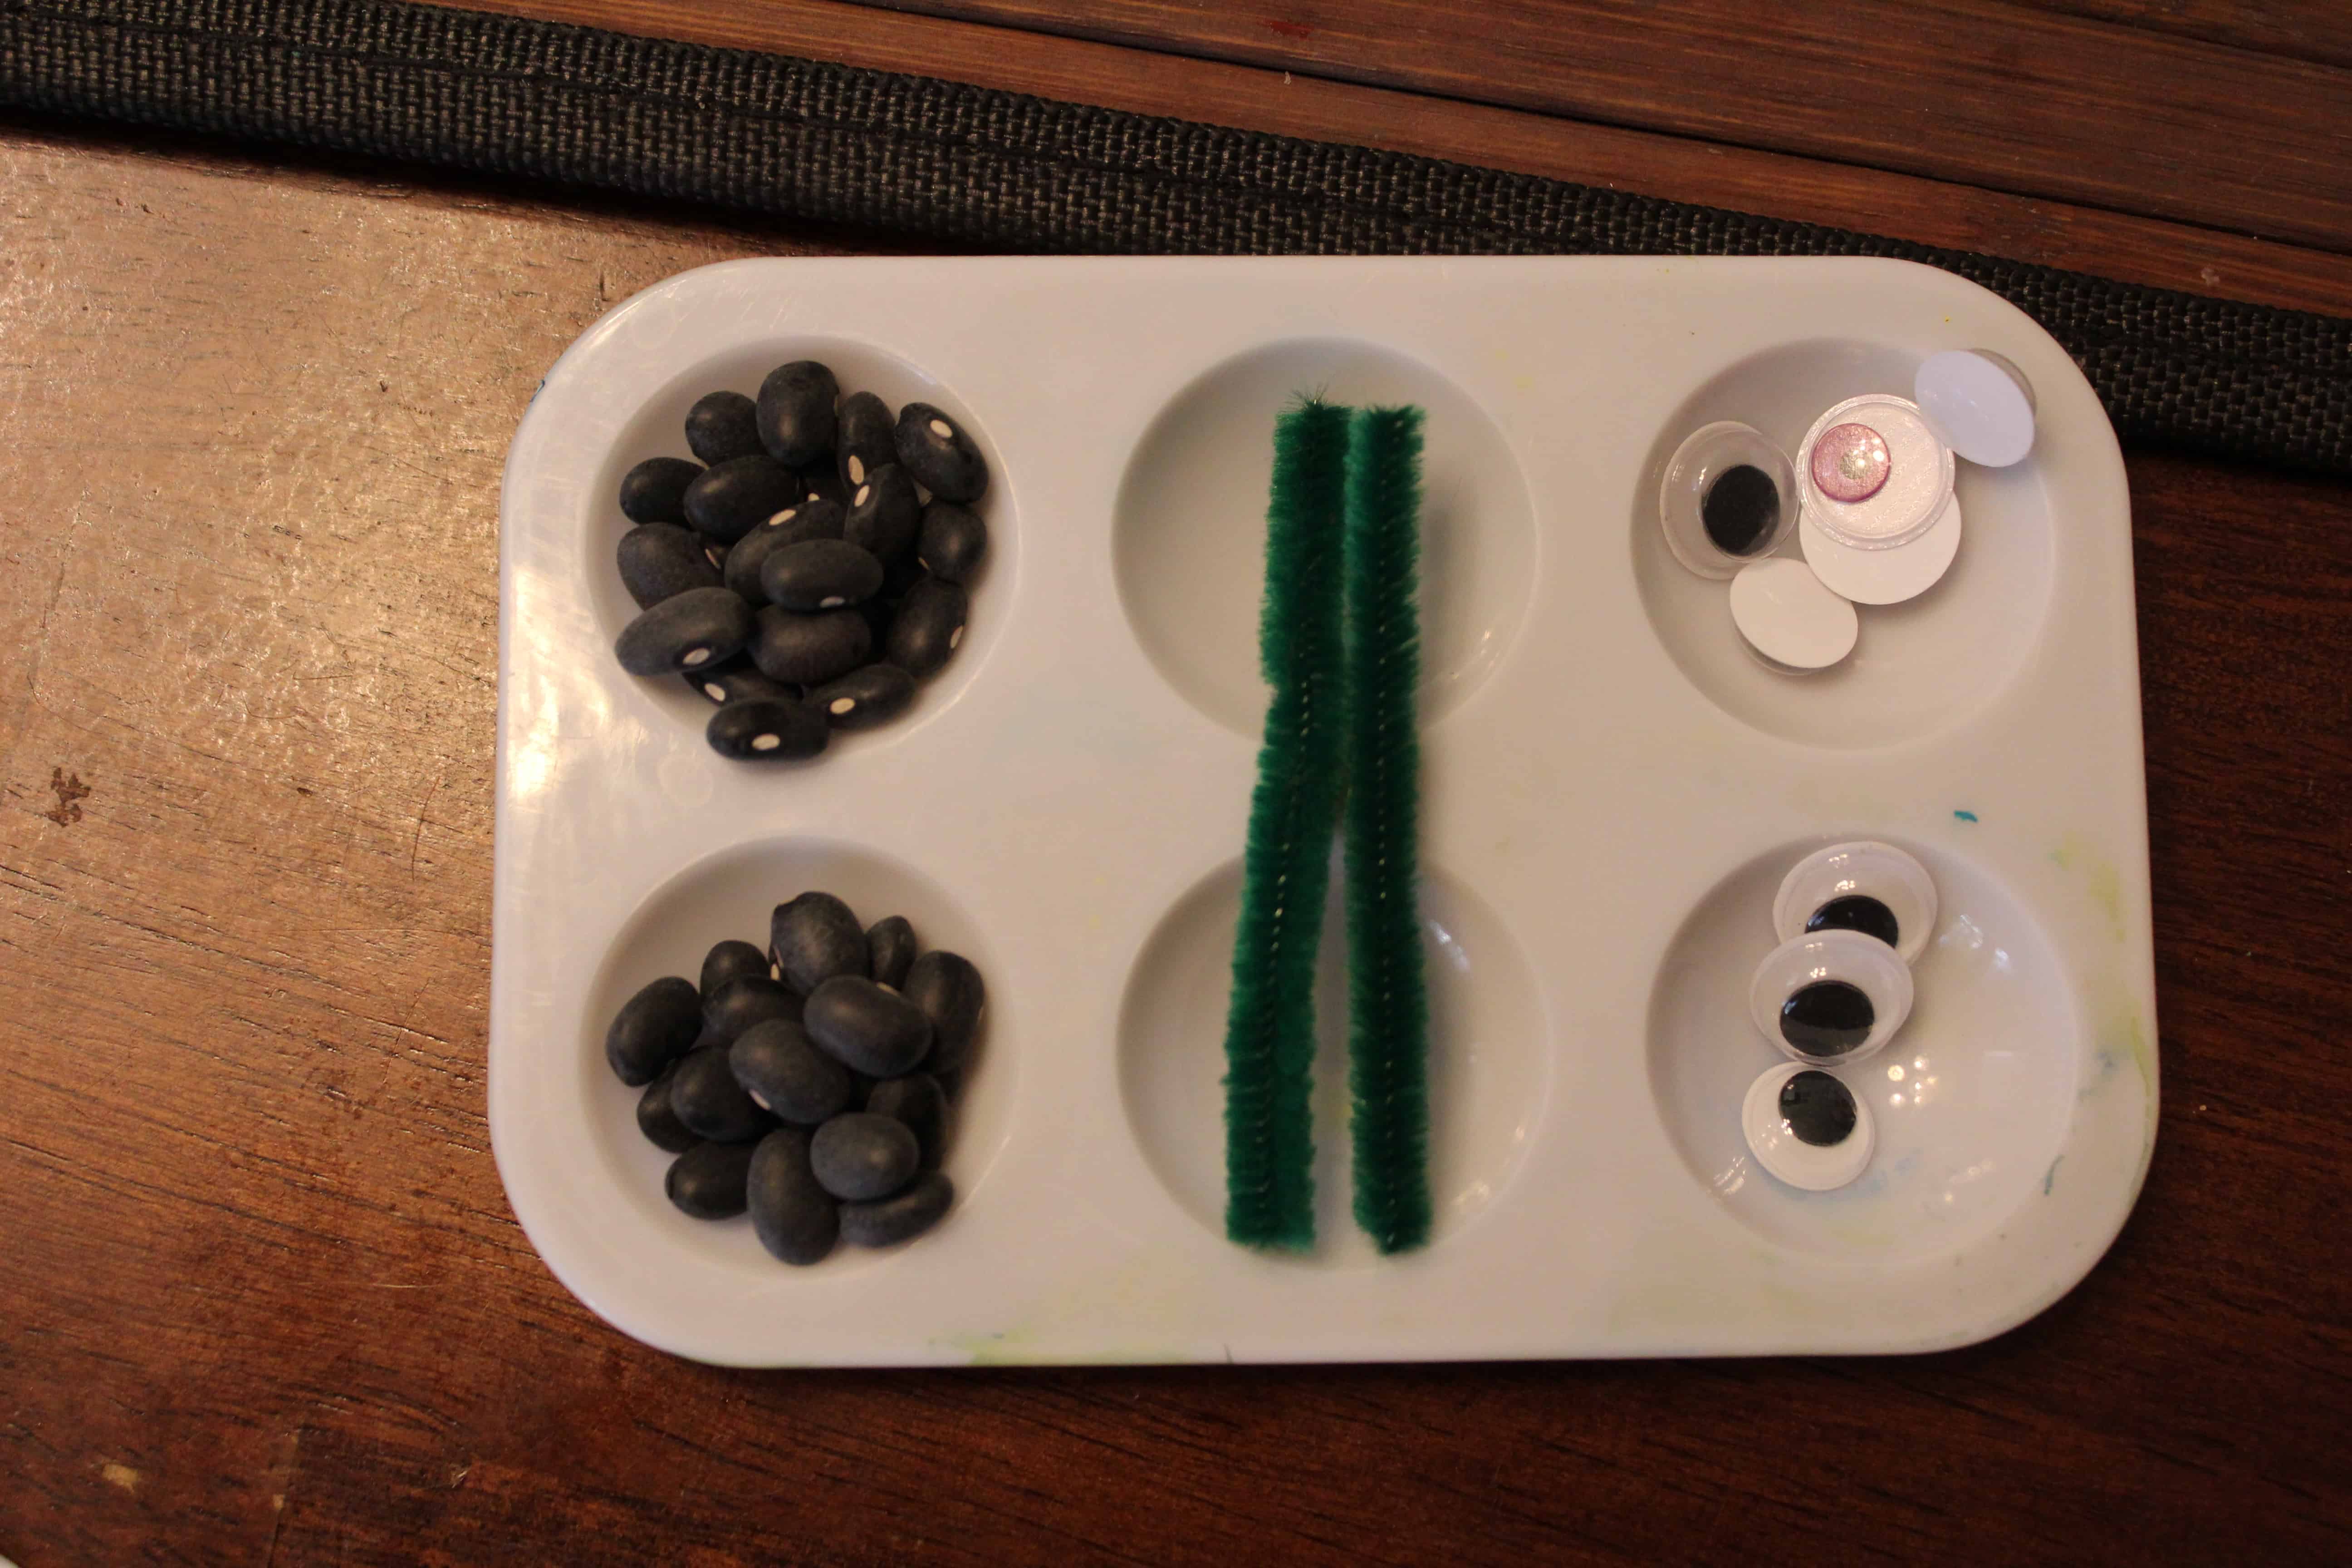 A tiny pallette filled with black beans, googly eyes and green chenille pipe.